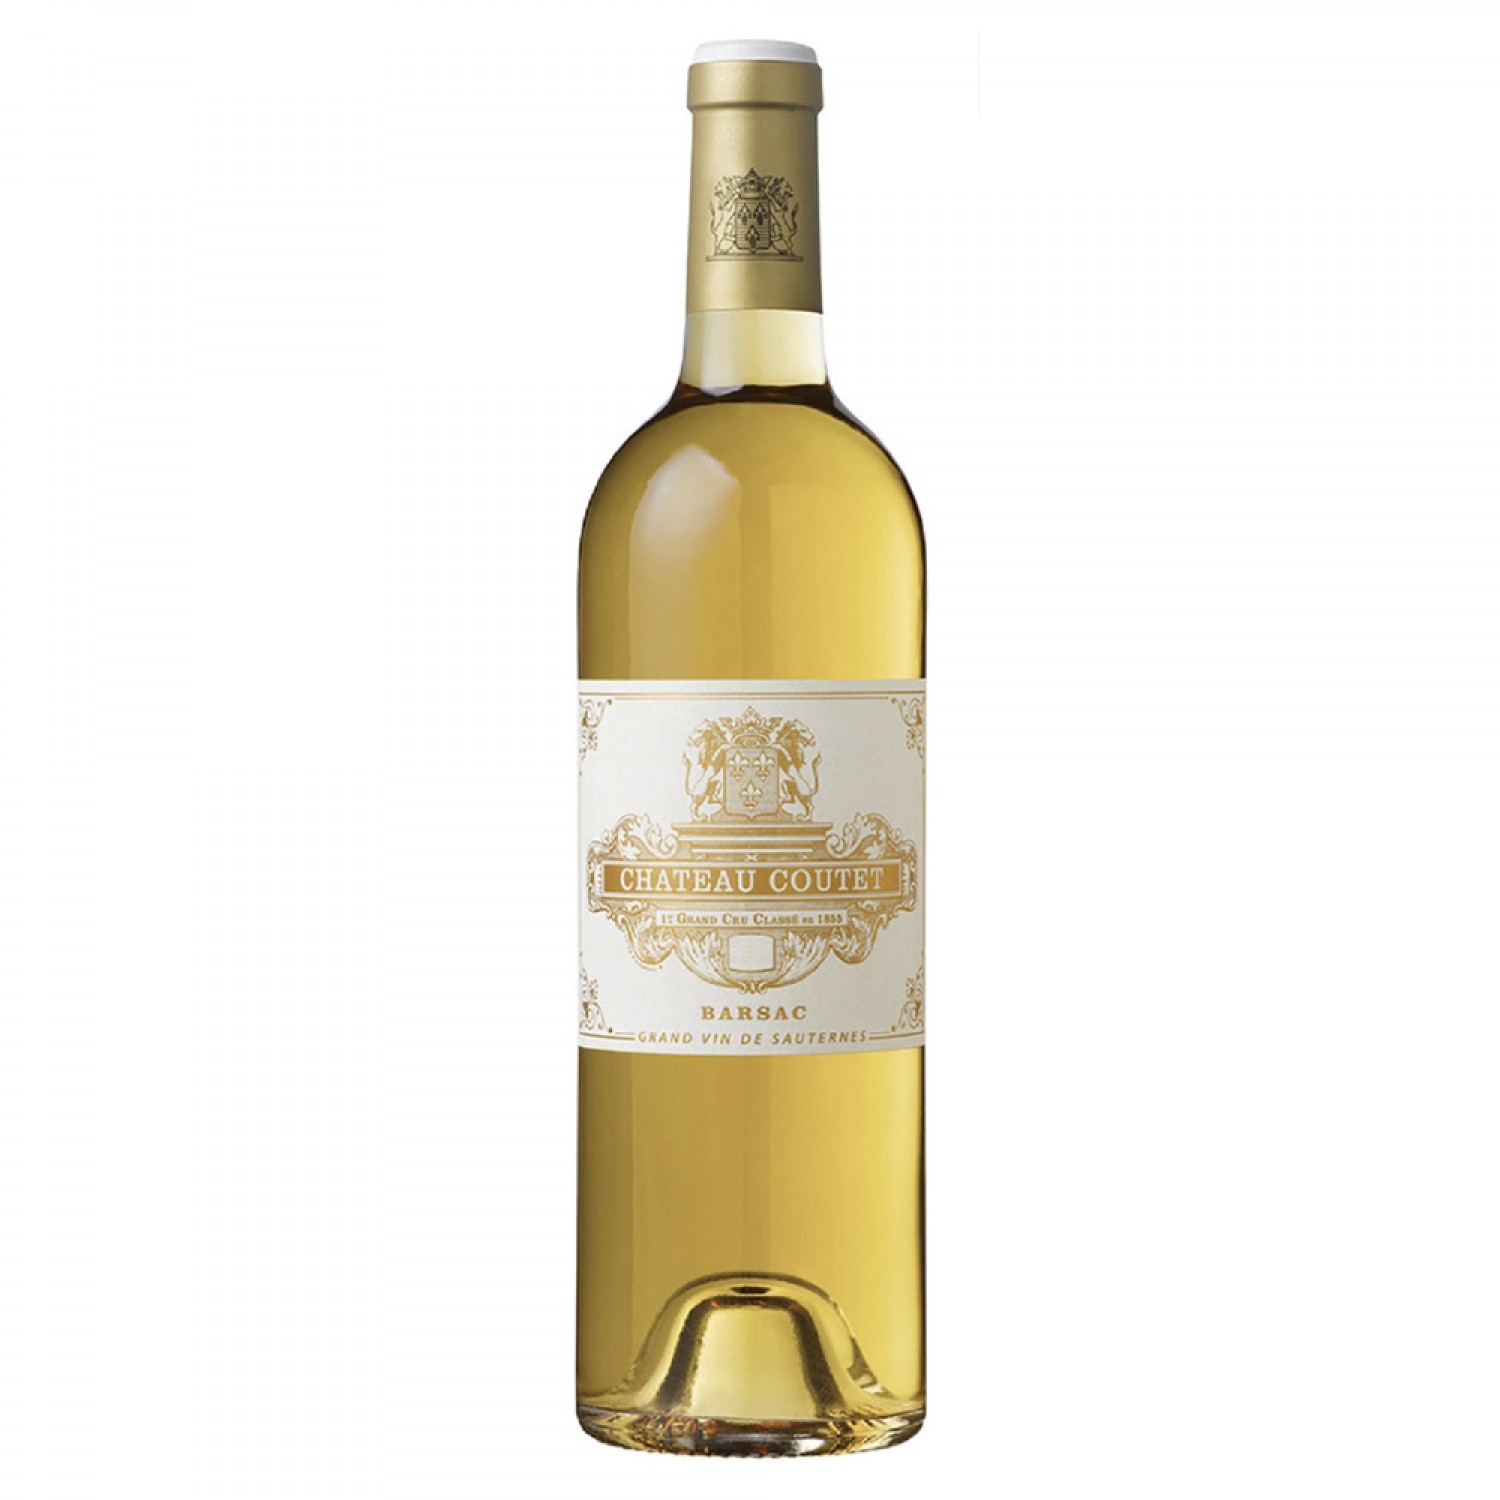 Chateau Coutet 2015, Barsac 750ml